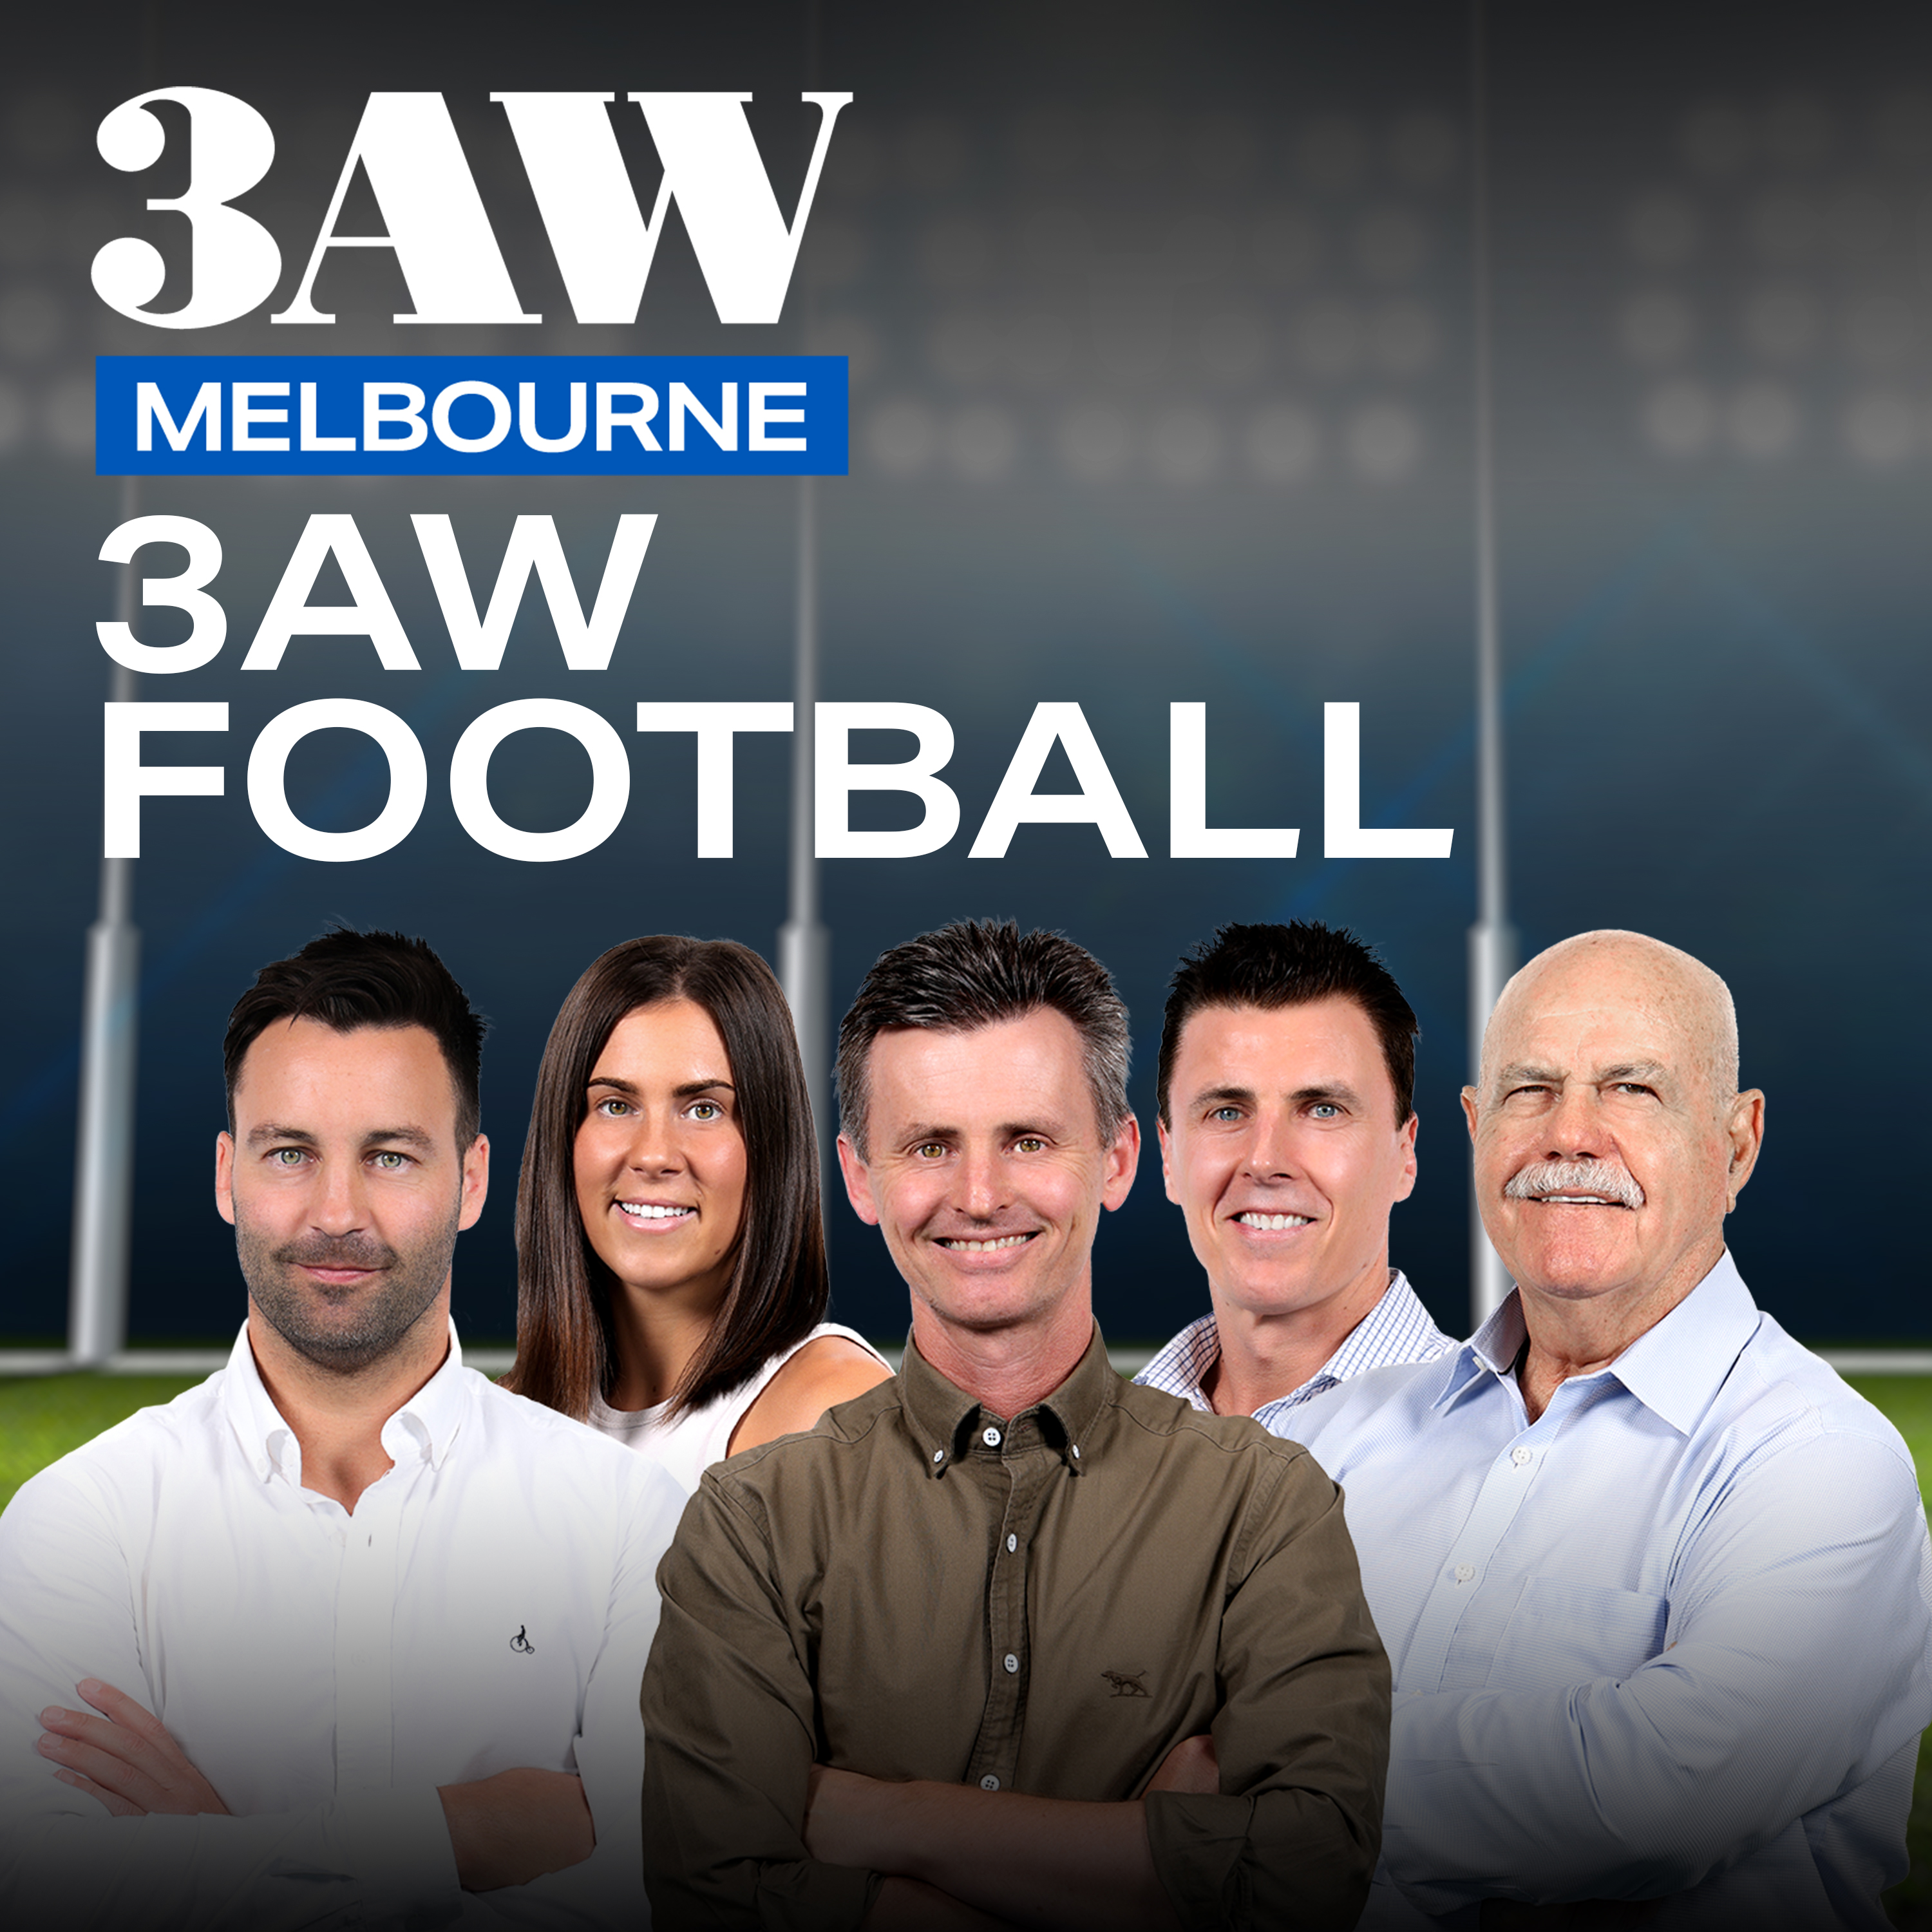 AFL Operations Manager Steve Hocking joins us on 3AW Football